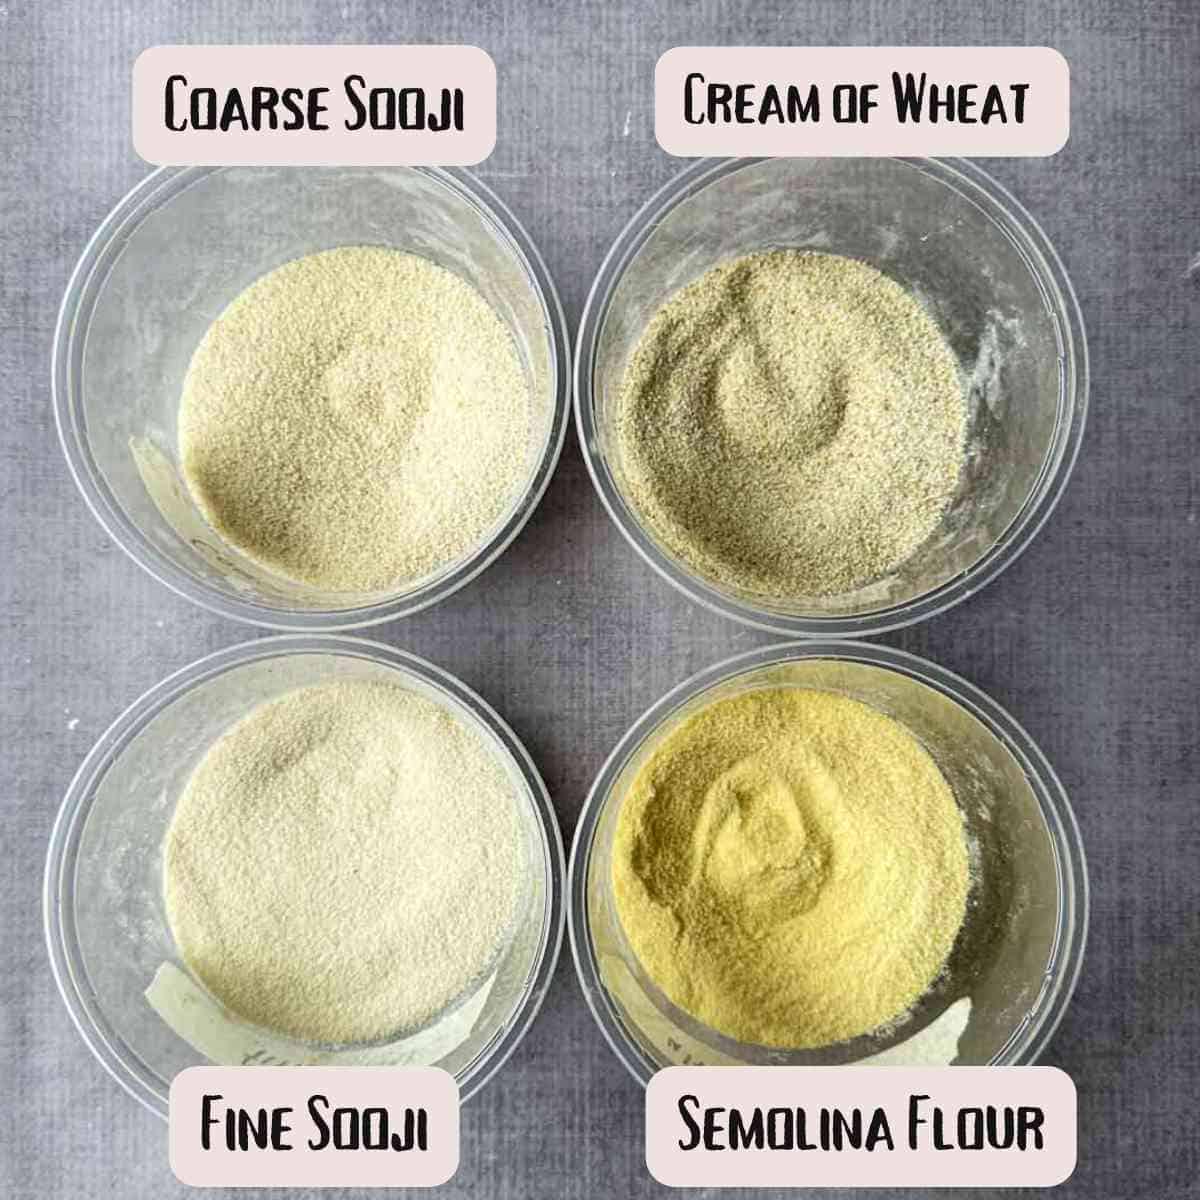 Four different types of flours used for pani puri. Top left is coarse sooji, top right is cream of wheat or farina, bottom left is fine sooji, and bottom right is semolina flour